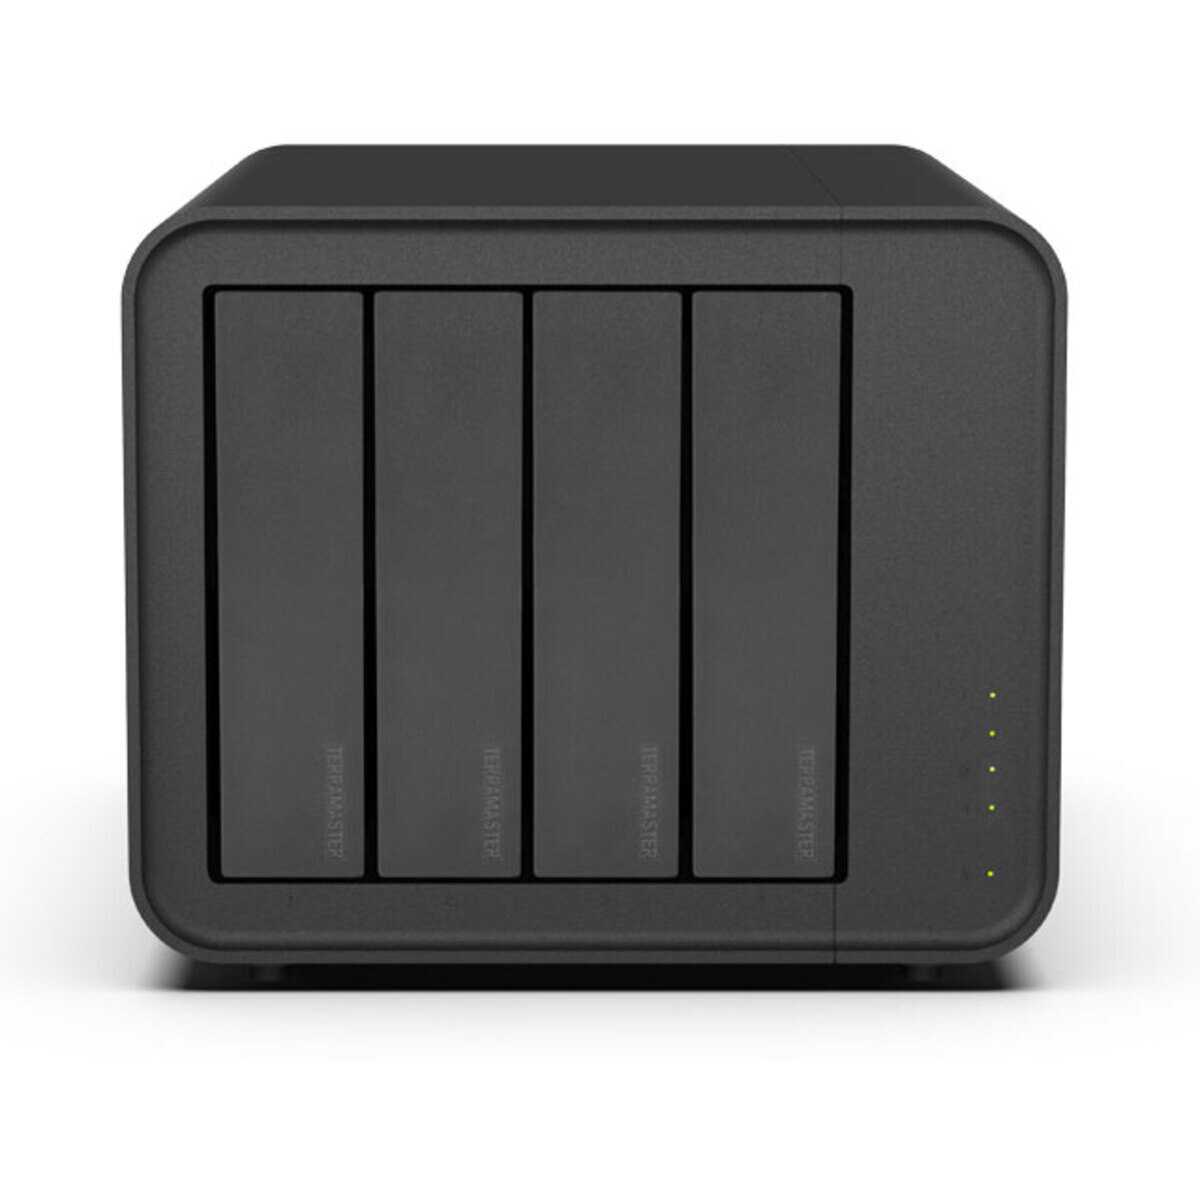 TerraMaster F4-212 16tb 4-Bay Desktop Personal / Basic Home / Small Office NAS - Network Attached Storage Device 4x4tb Samsung 870 EVO MZ-77E4T0BAM 2.5 560/530MB/s SATA 6Gb/s SSD CONSUMER Class Drives Installed - Burn-In Tested - ON SALE F4-212